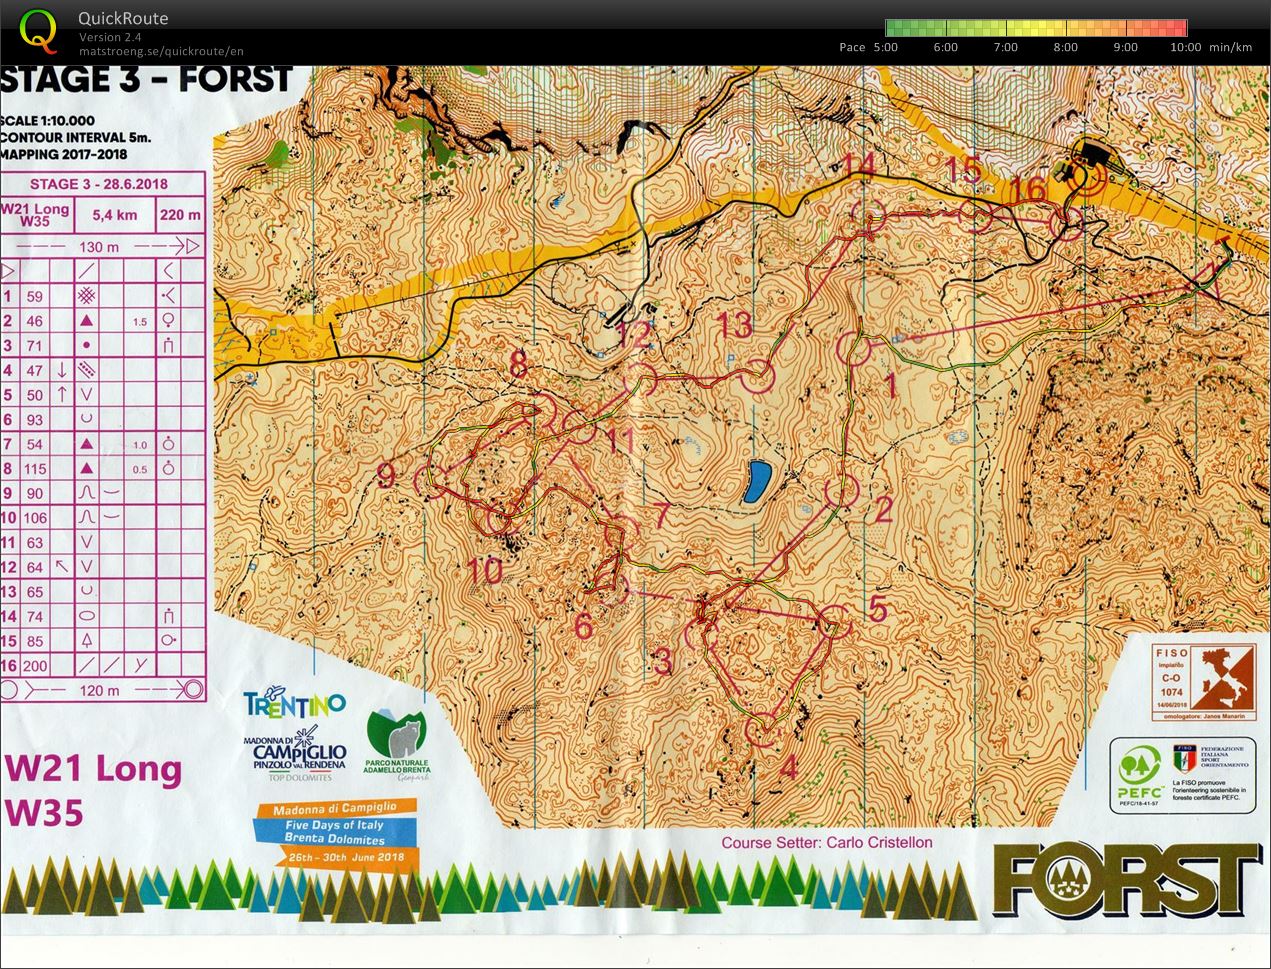 5D of Italy - stage 3 - long - D21long (28/06/2018)